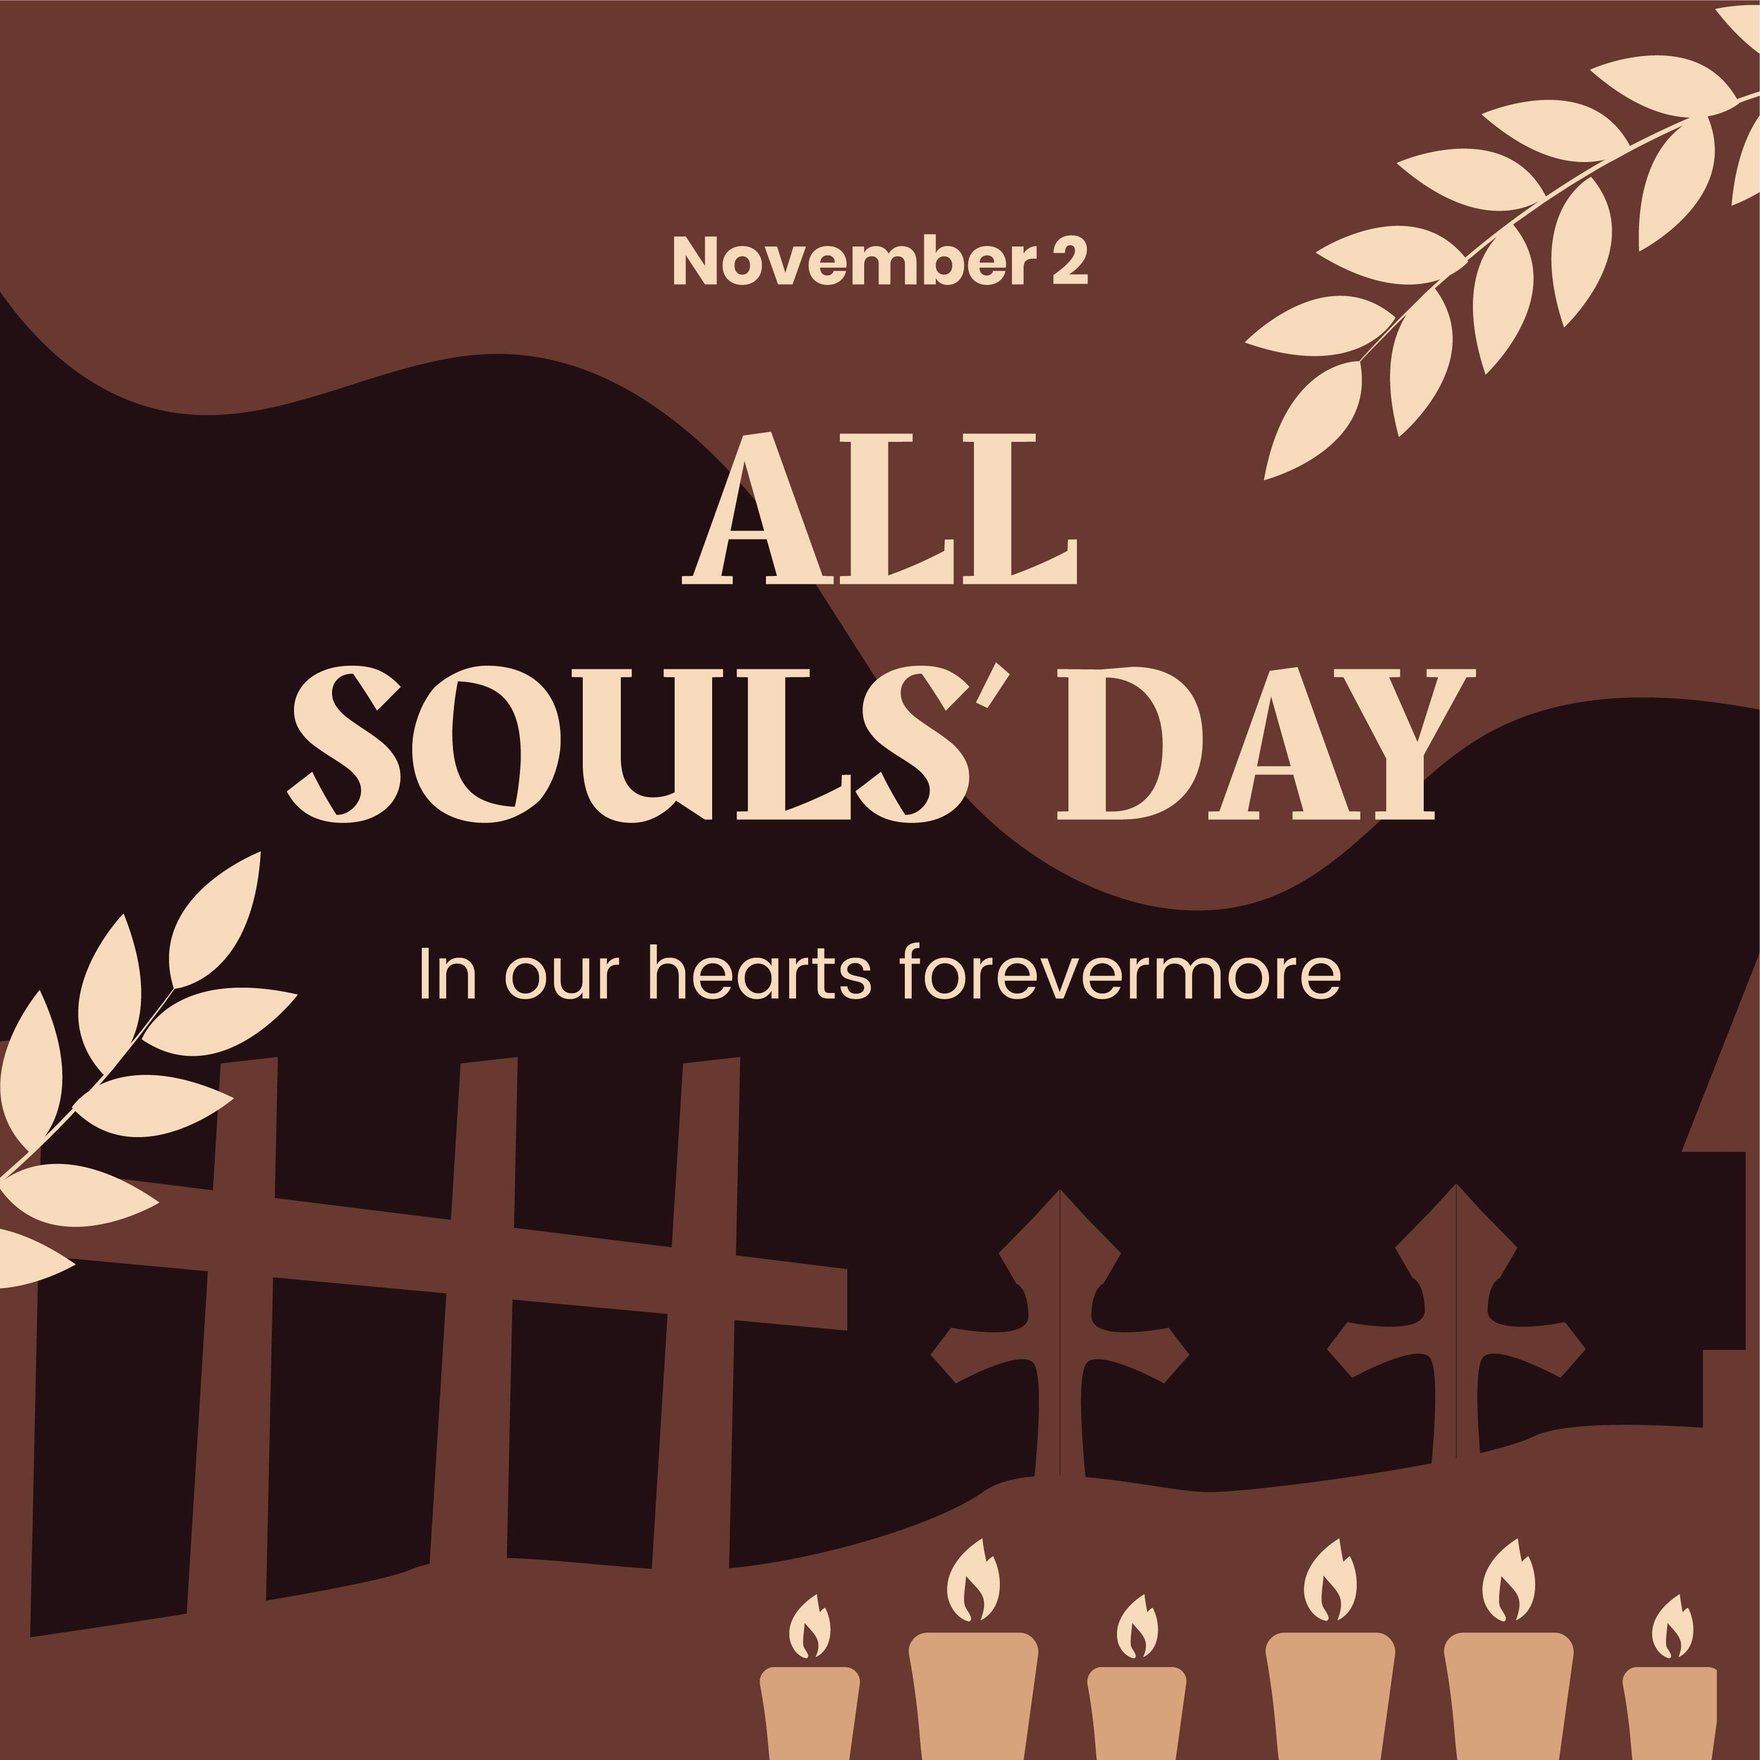 Free All Souls' Day Whatsapp Post in Illustrator, PSD, EPS, SVG, JPG, PNG